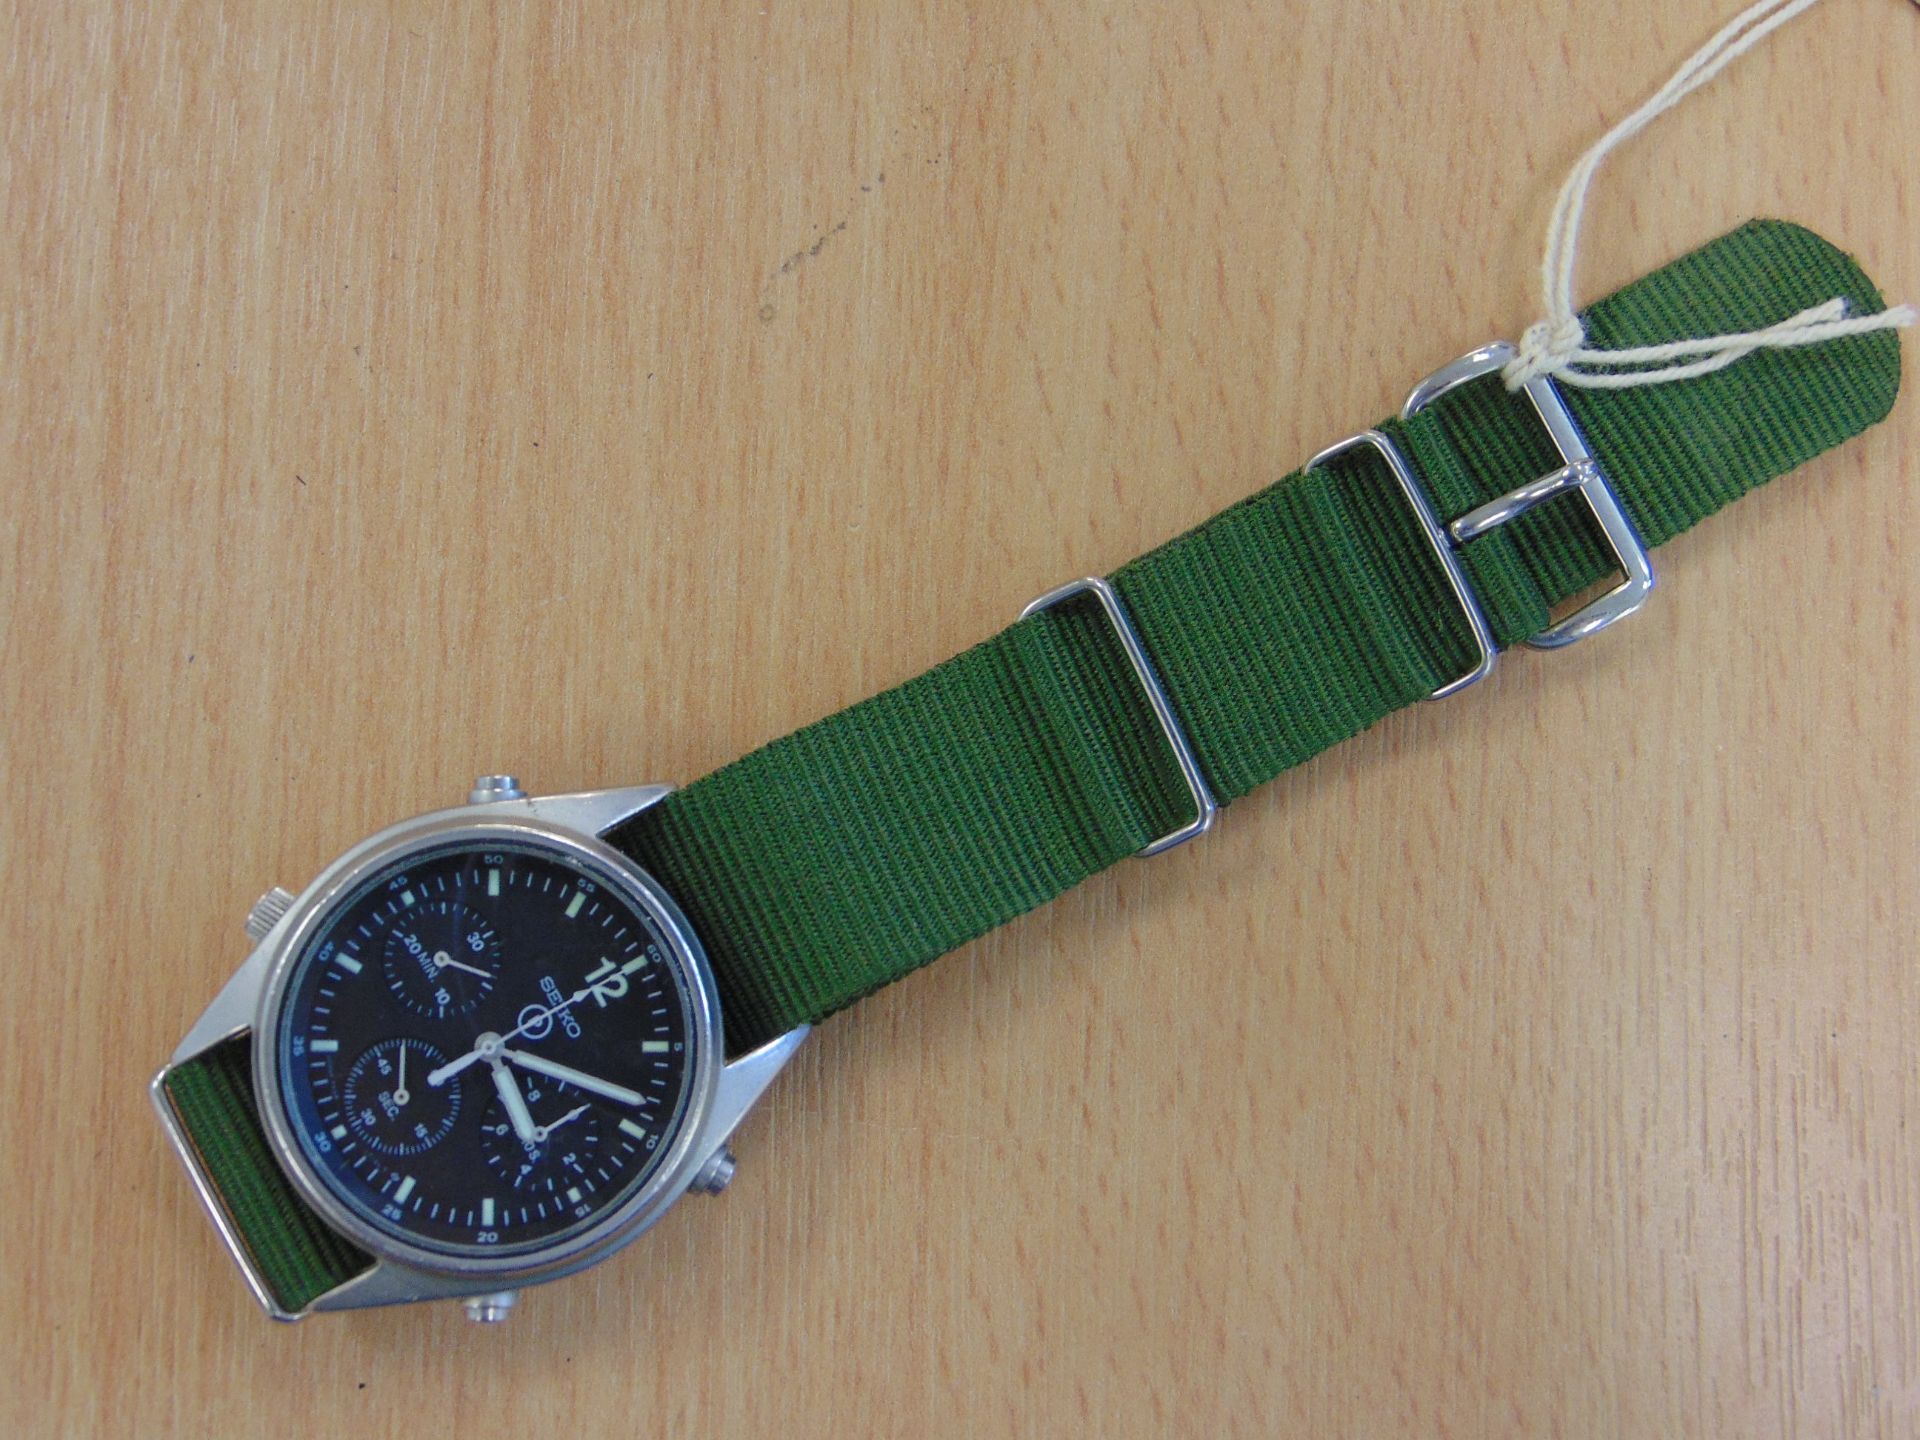 SEIKO GEN 1 PILOTS CHRONO RAF ISSUE WATCH NATO MARKINGS DATED 1989 AS ISSUED TO HARRIER FORCE